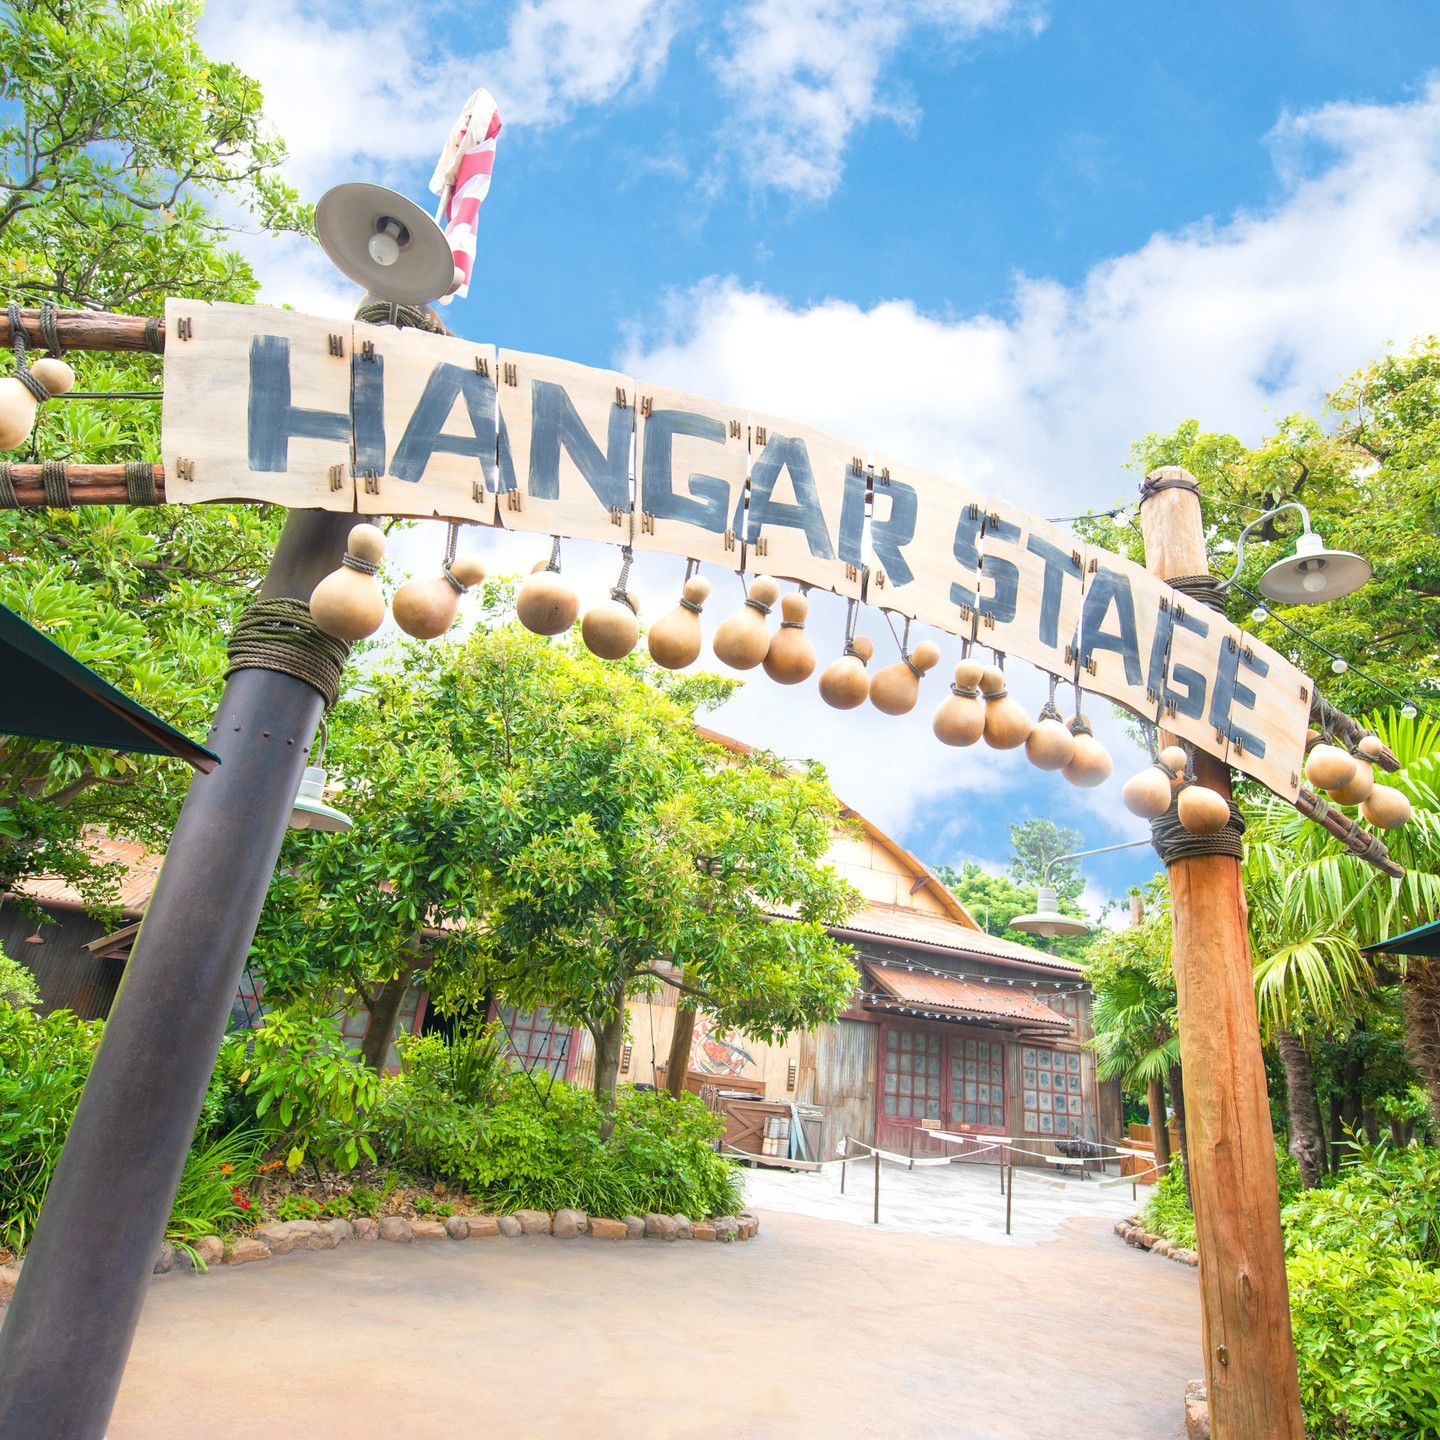 You never know what you will discover in the Jungle!
夏気分が高まる～☀
#hangarstage...のイメージ